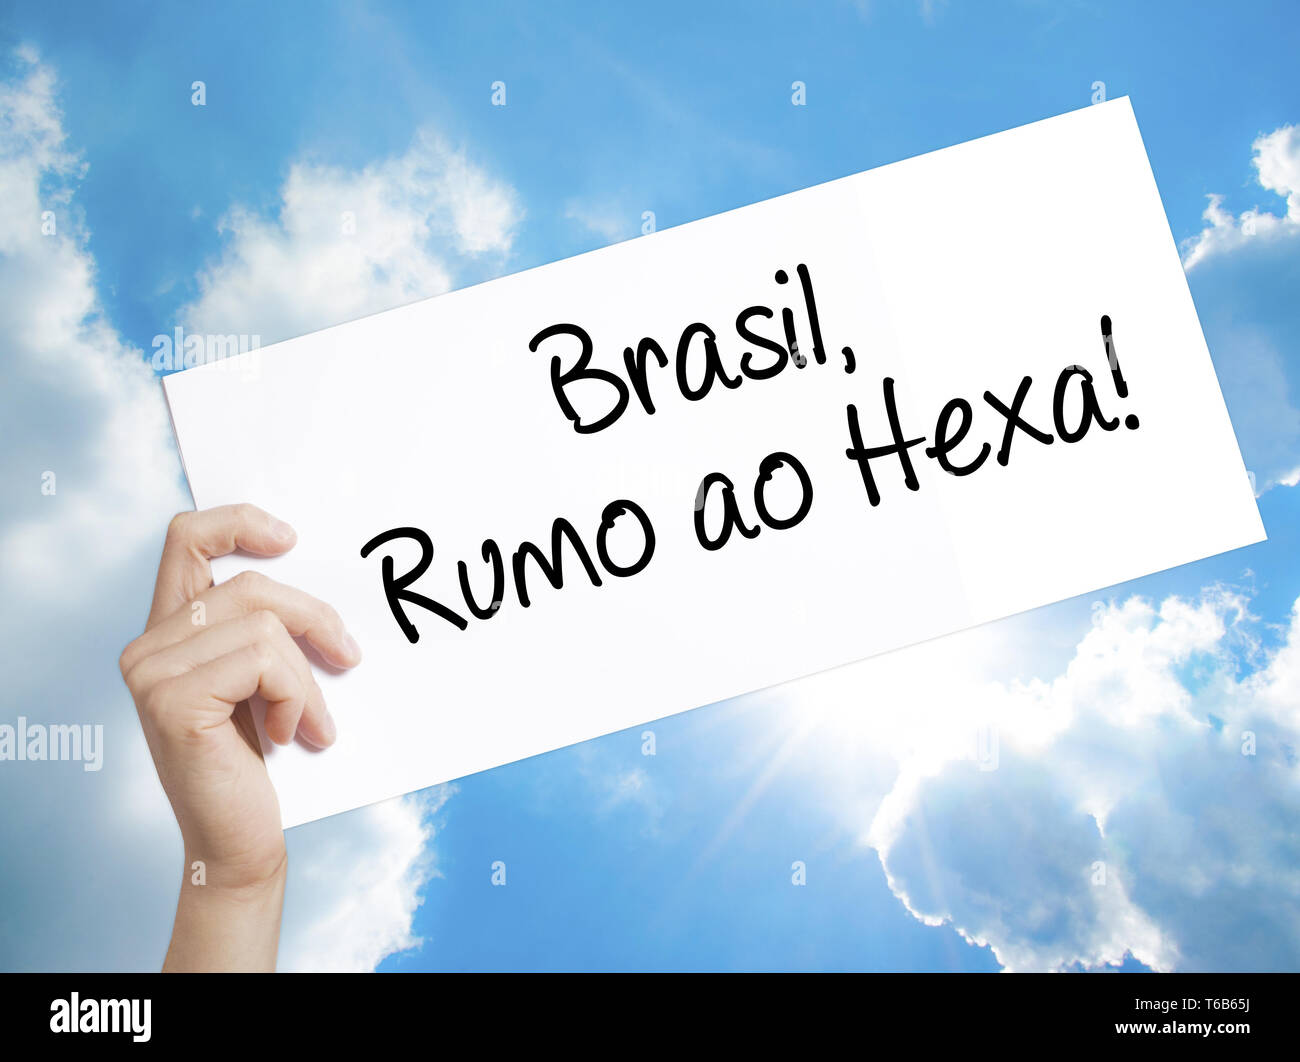 Brasil, Rumo ao Hexa! Sign on white paper. Man Hand Holding Paper with text. Isolated on sky background. Stock Photo